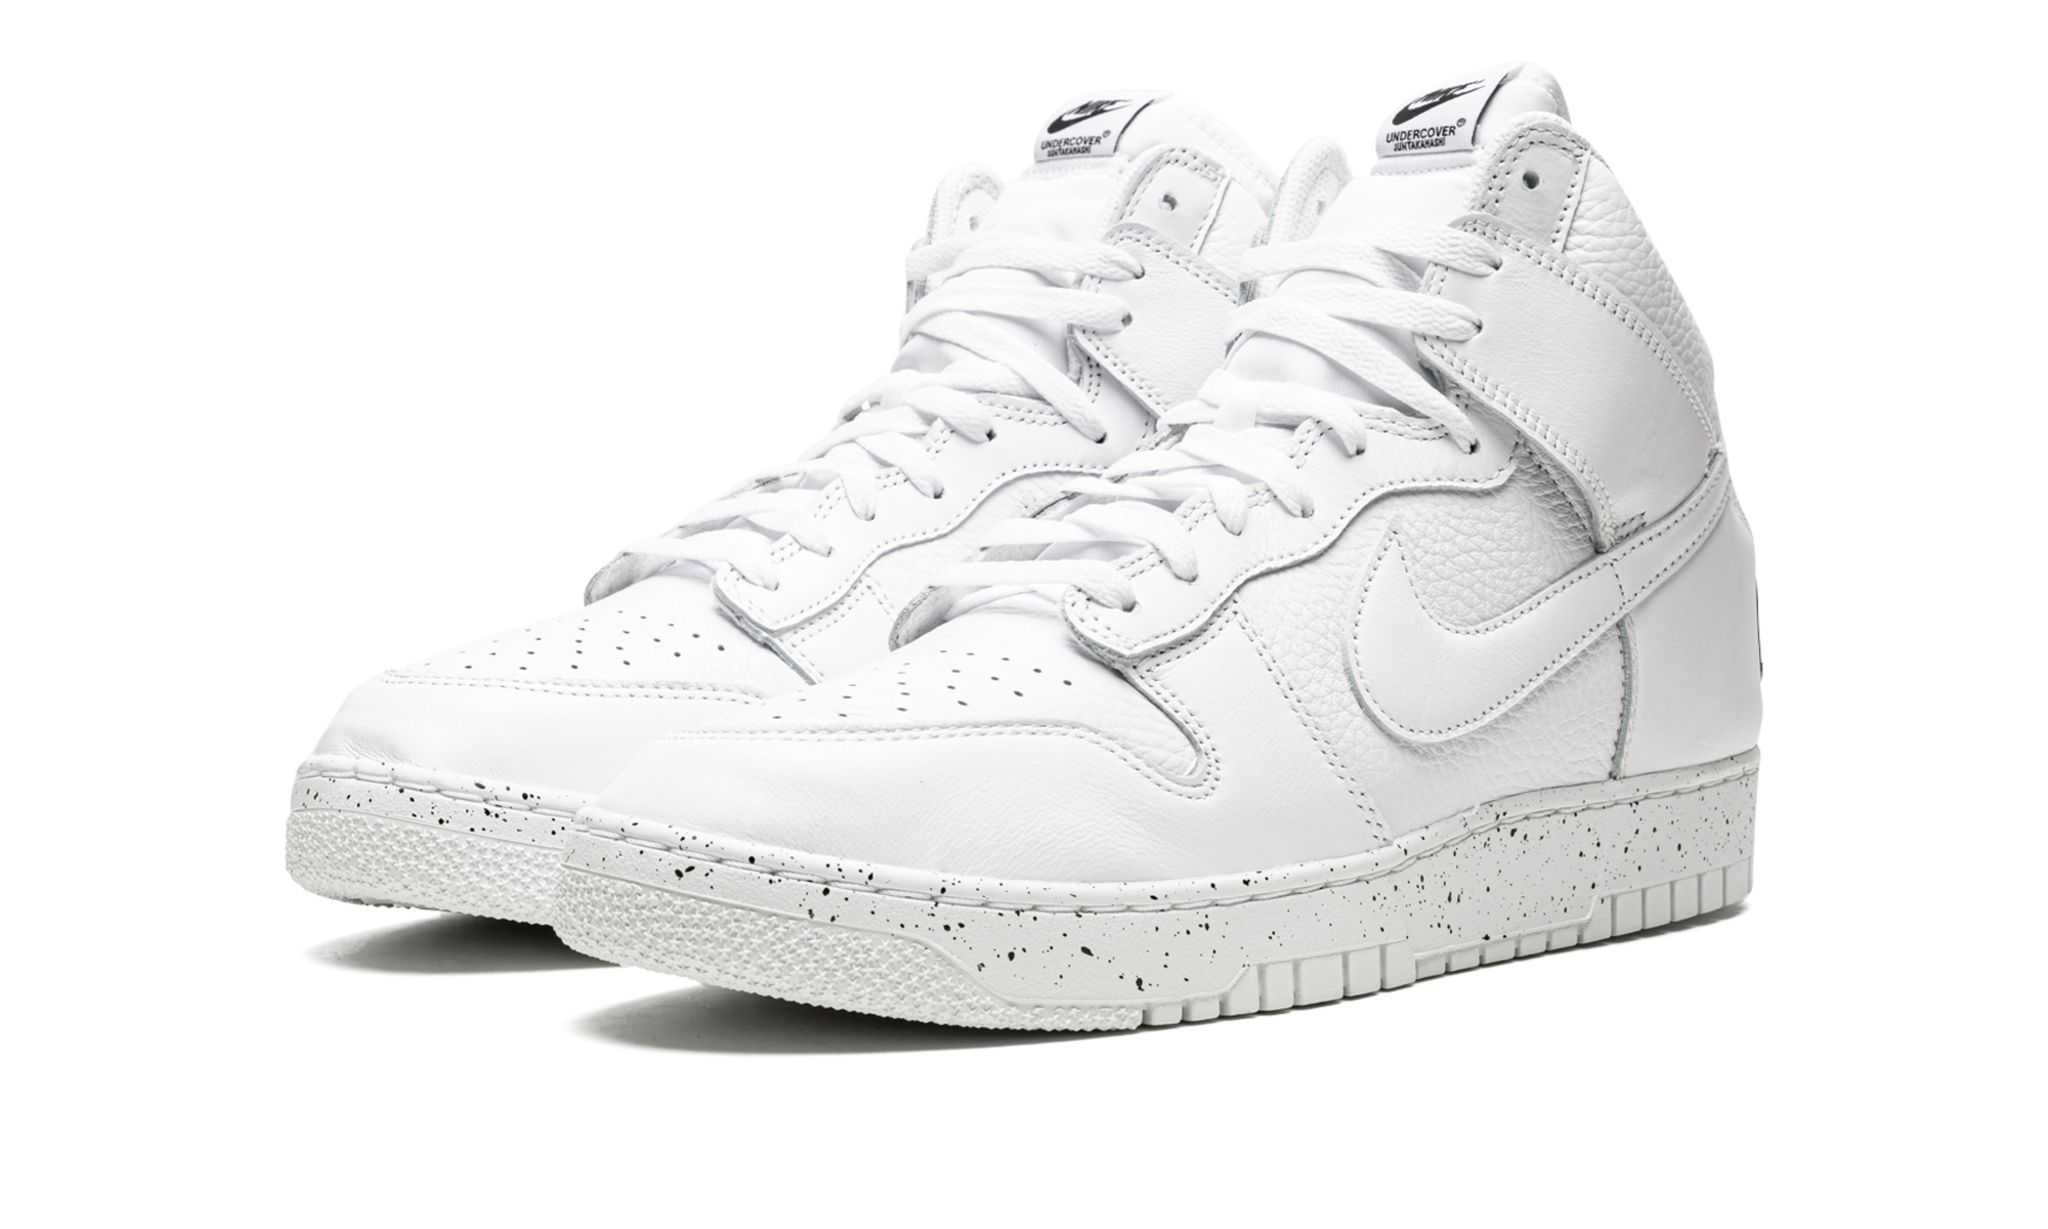 Dunk High "Undercover Chaos White" - 2